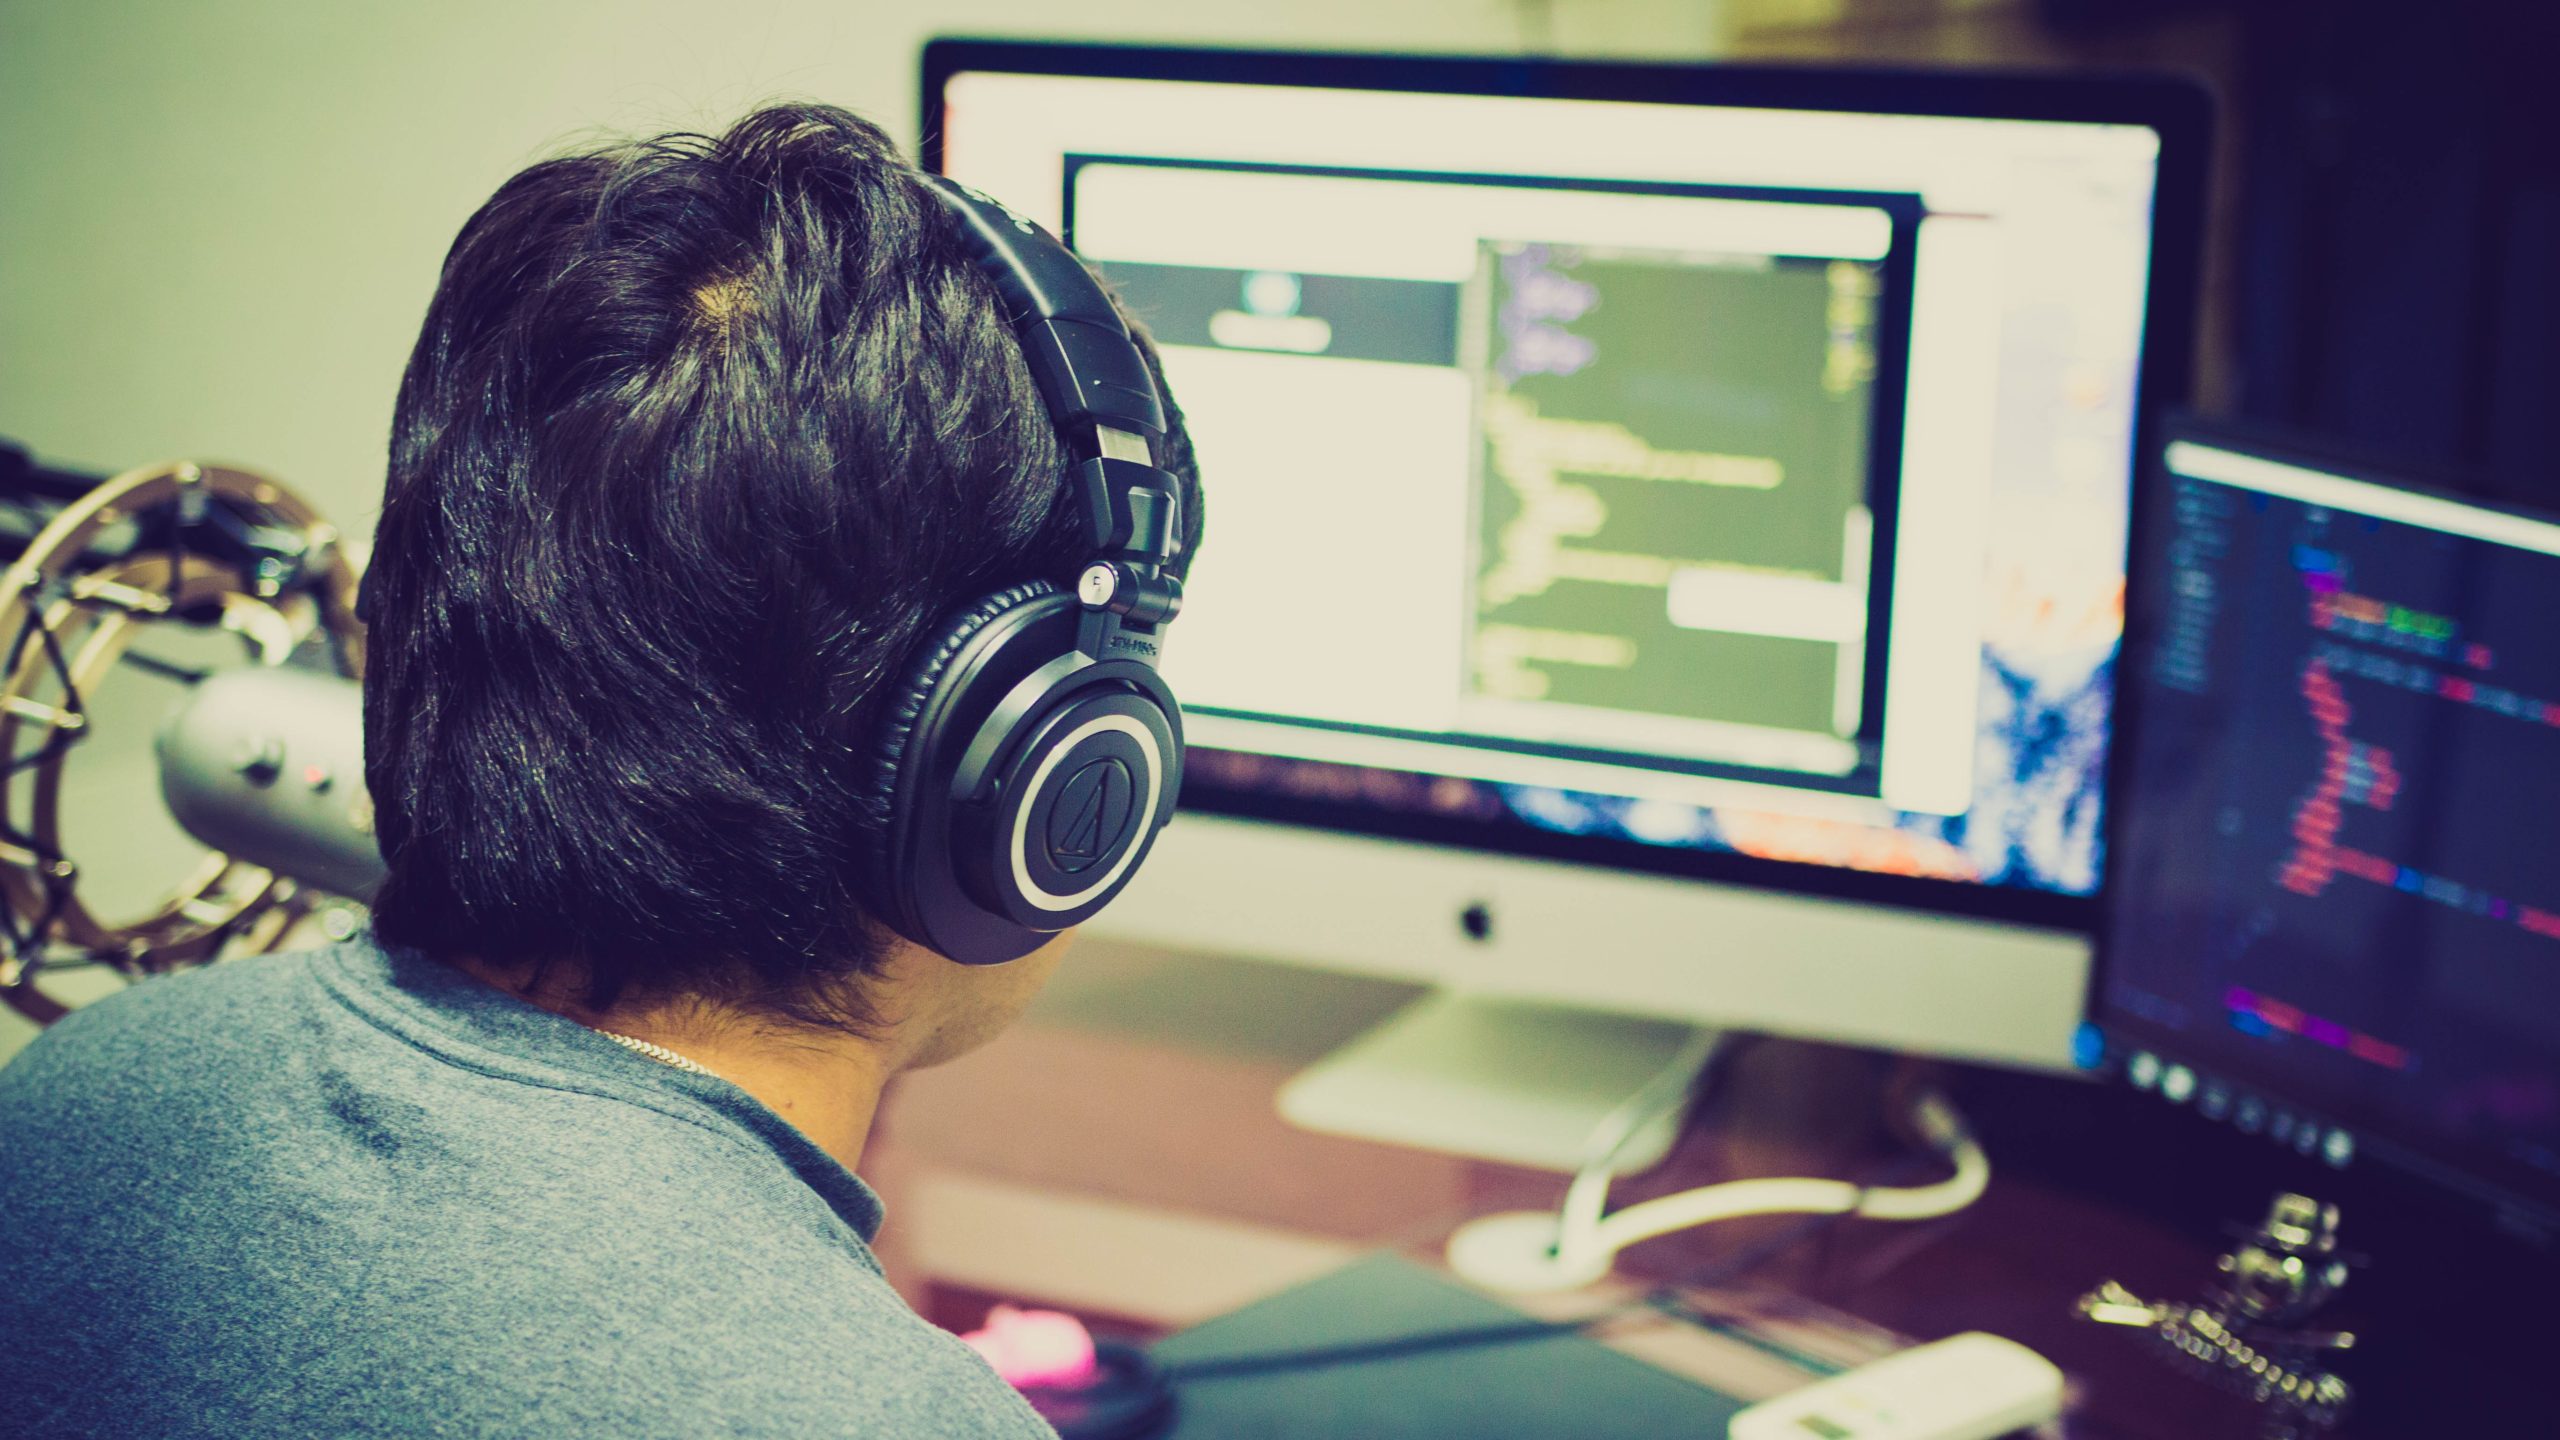 7 Tips Coders Can Use to Stay Focused and Productive